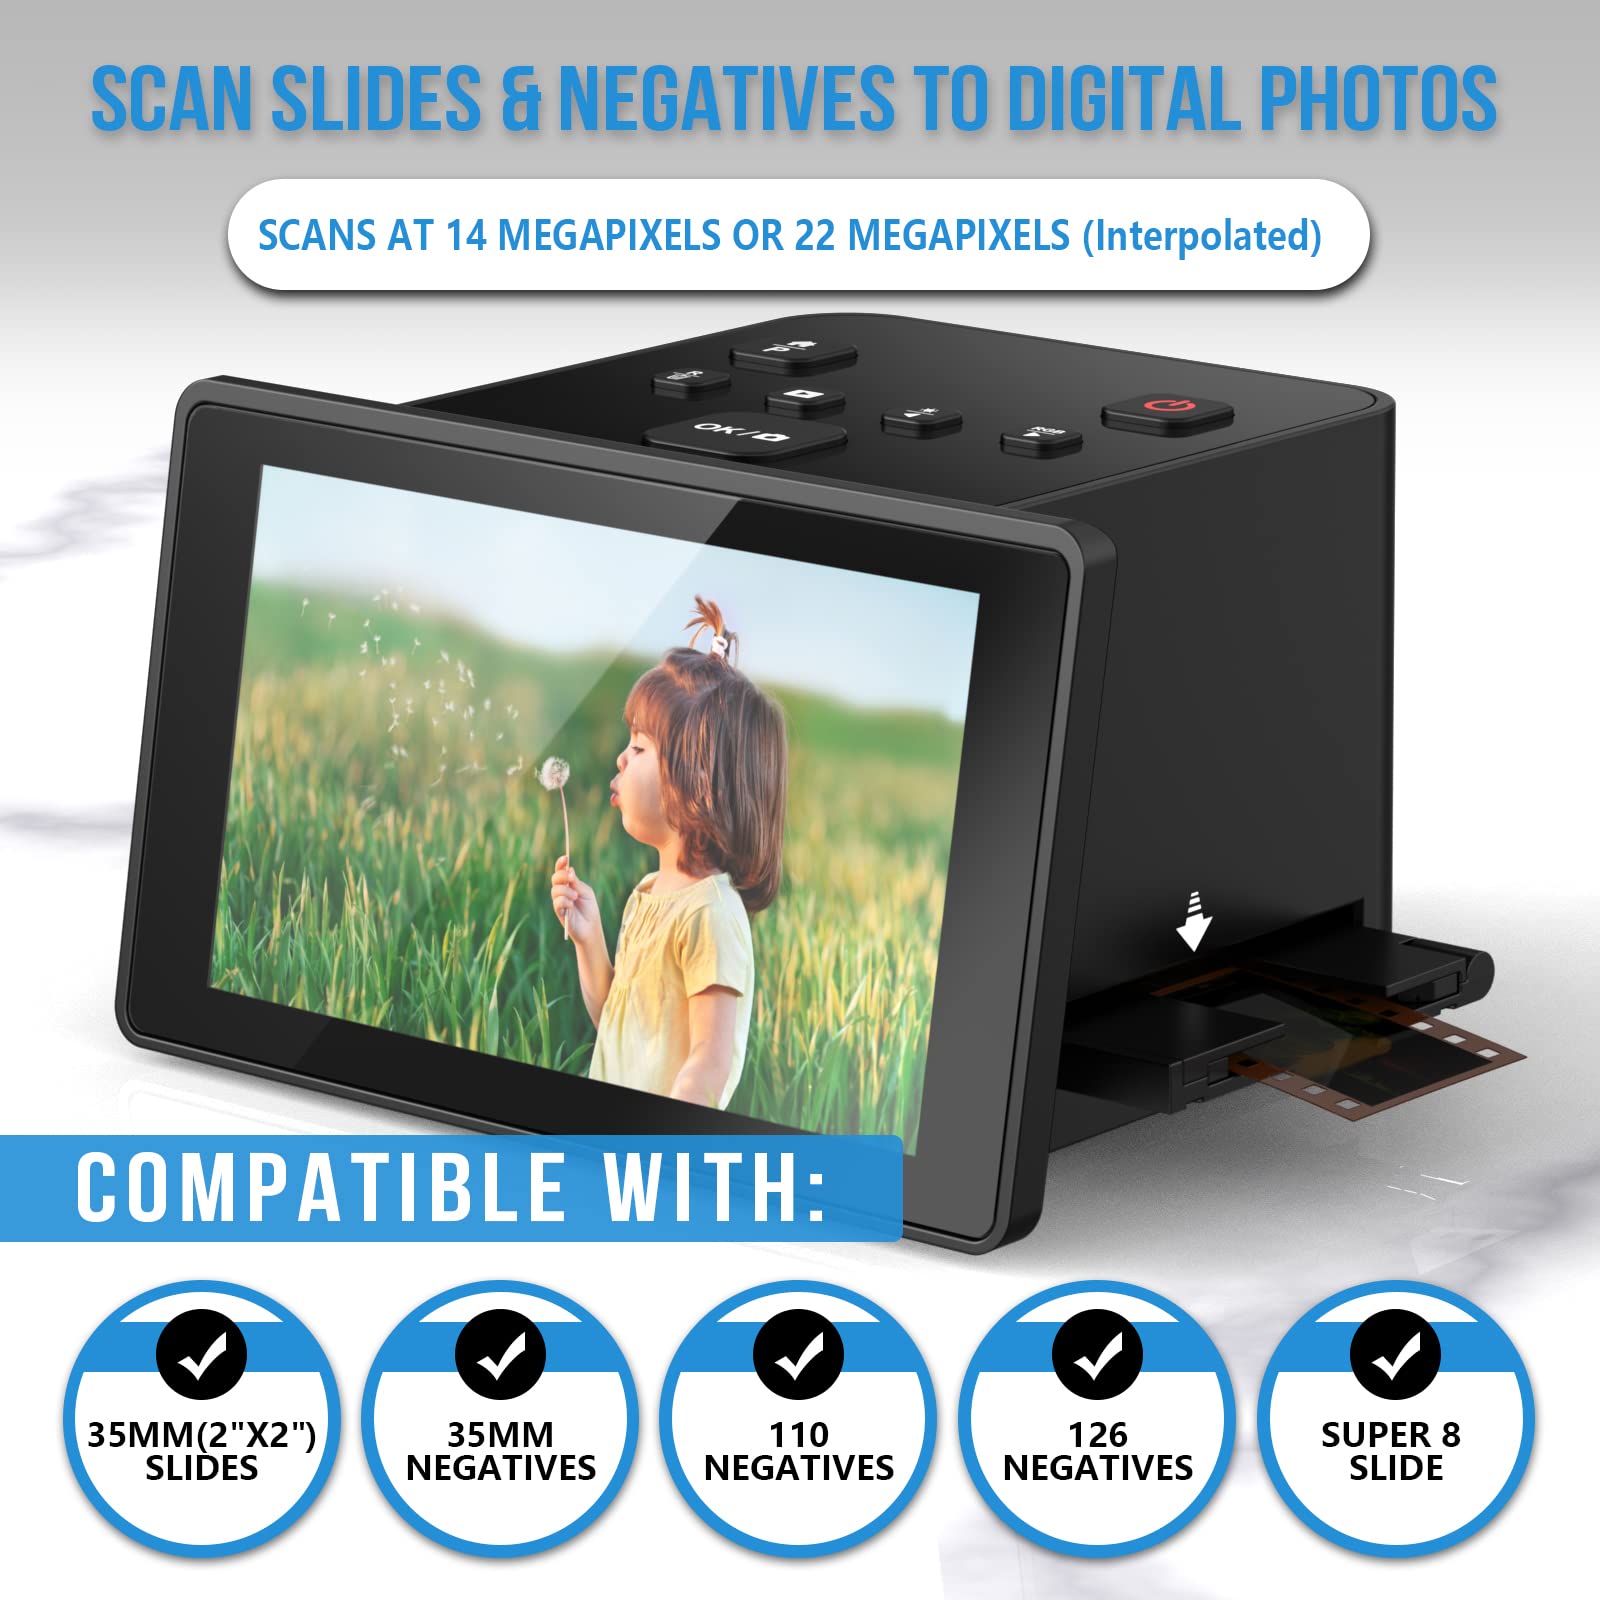 Film Scanner & Slide Viewer with a Large 5” LCD Screen